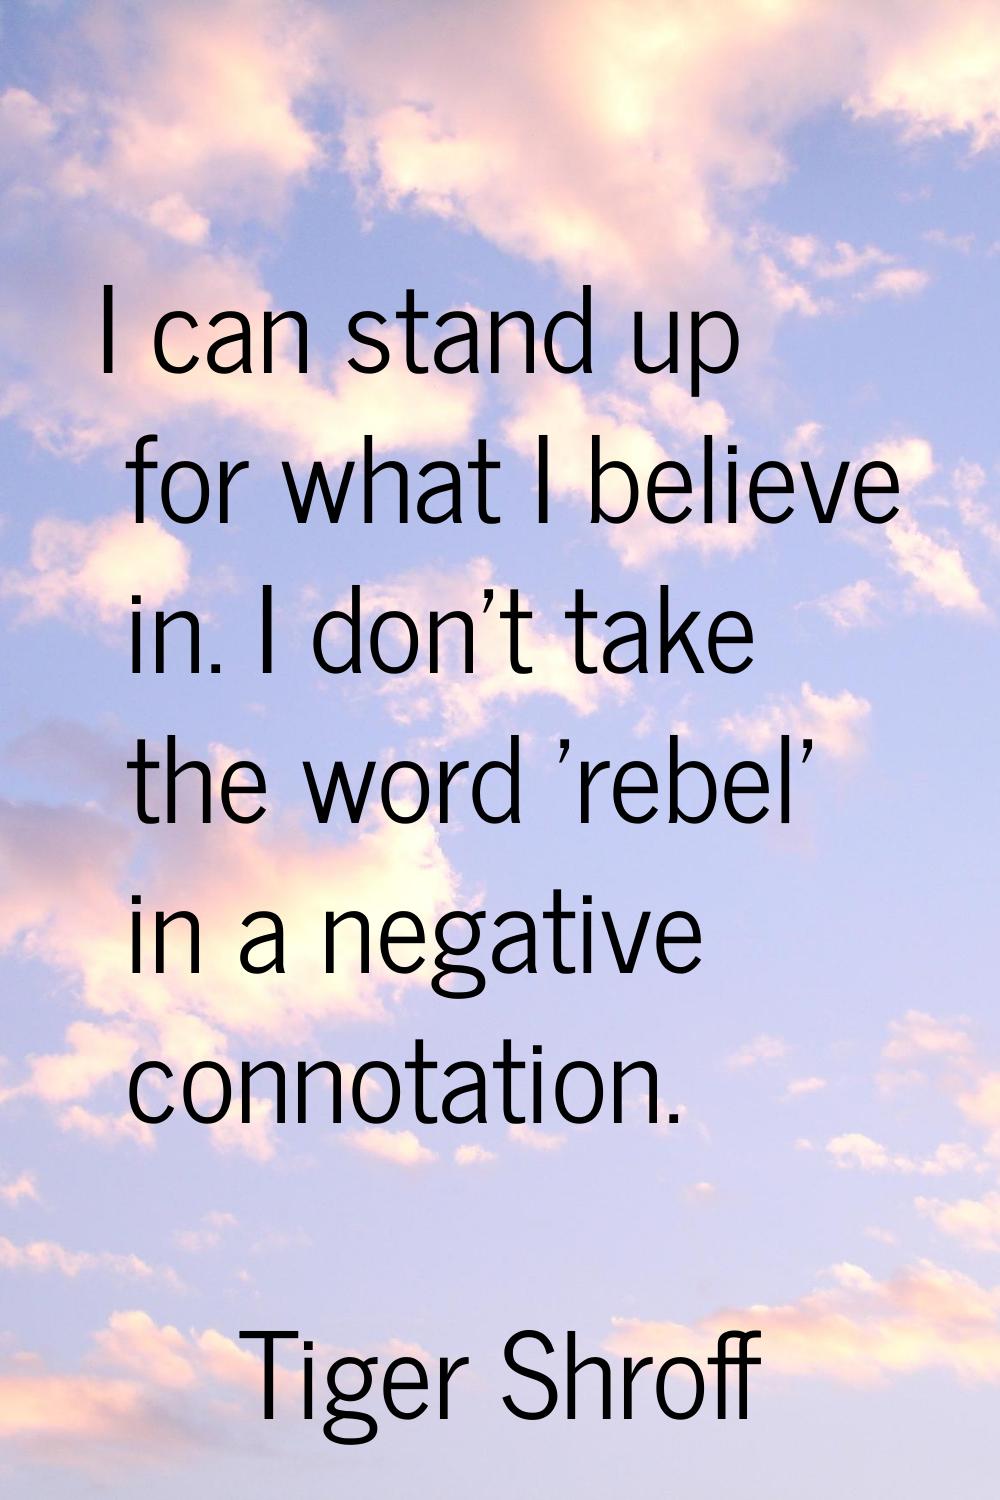 I can stand up for what I believe in. I don't take the word 'rebel' in a negative connotation.